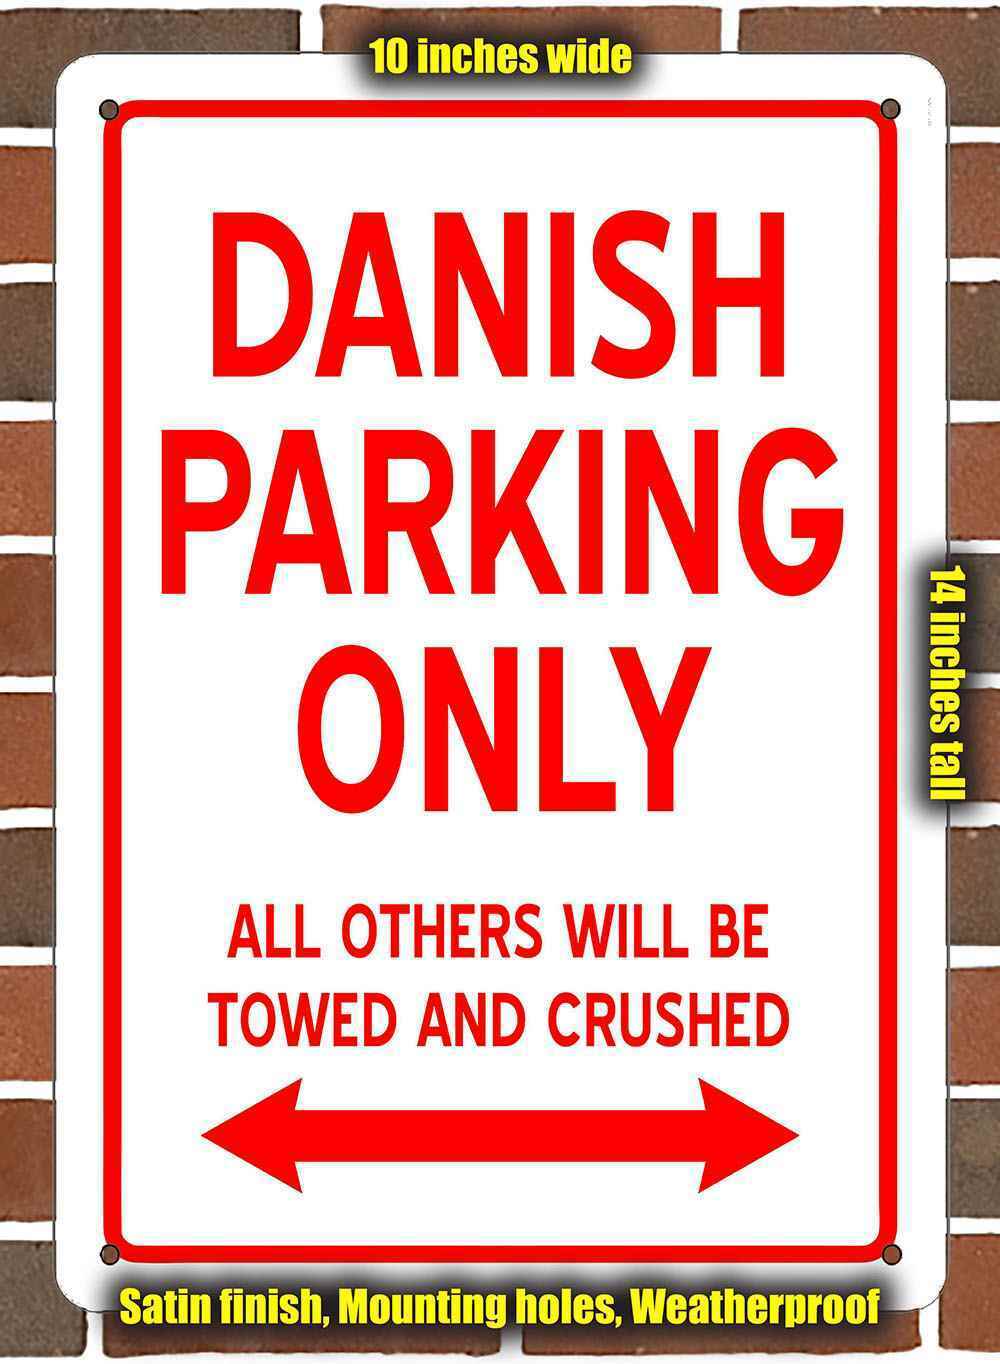 Metal Sign - DANISH PARKING ONLY- 10x14 inches